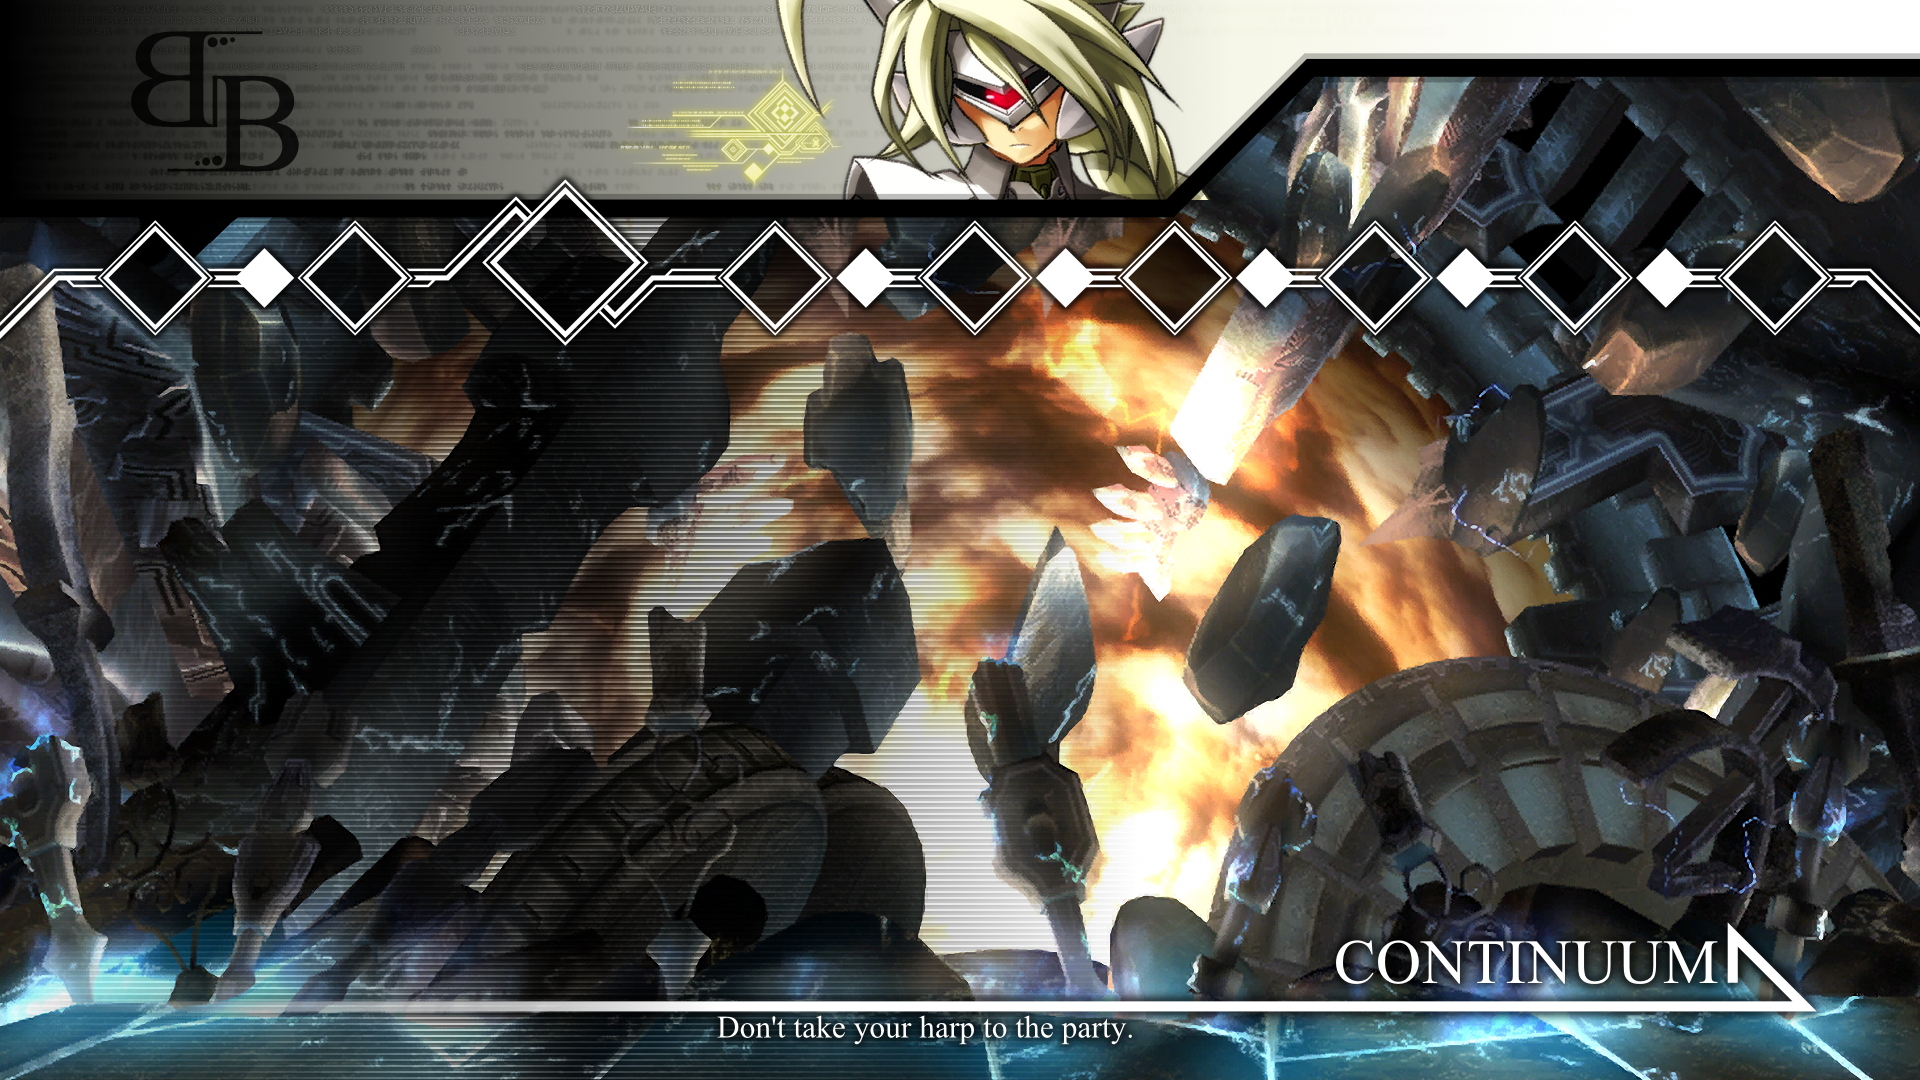 Download mobile wallpaper Blazblue: Continuum Shift, Video Game for free.